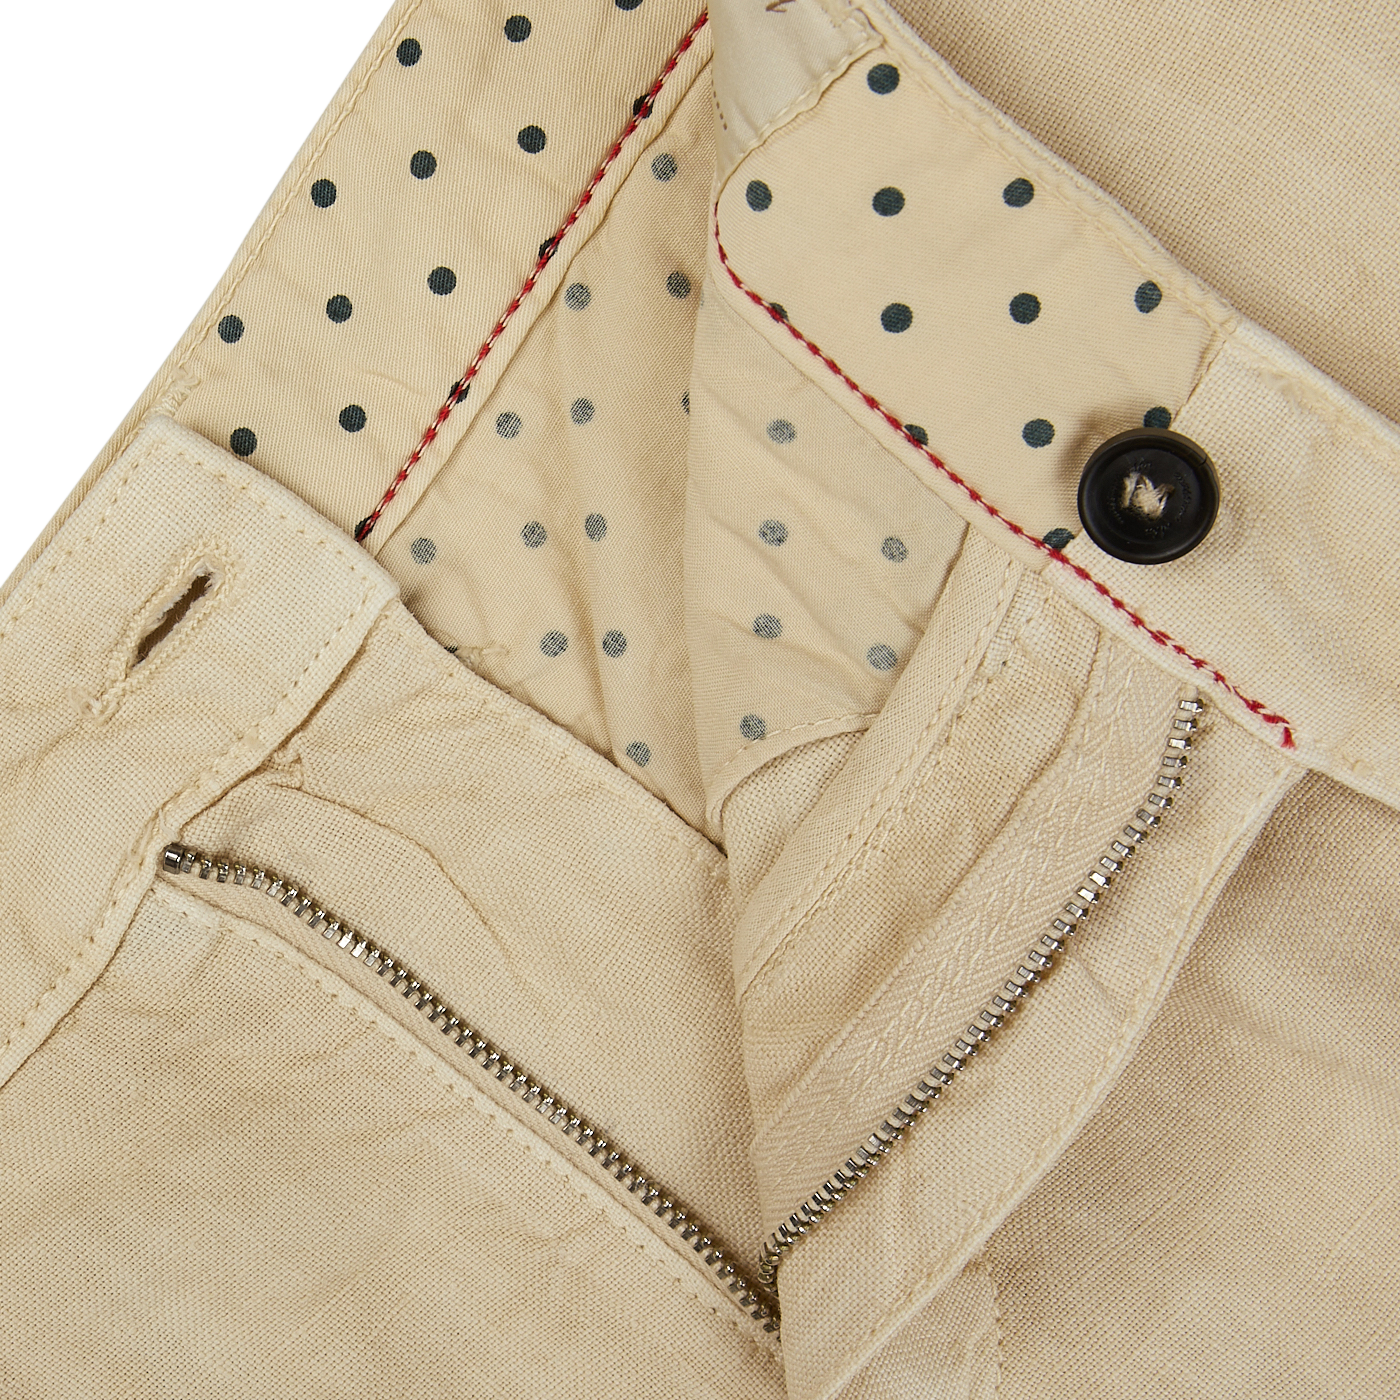 Close-up of a light beige linen garment with a dotted lining, featuring a zipper and button closure with red stitching detail on Massimo Alba casual trousers.